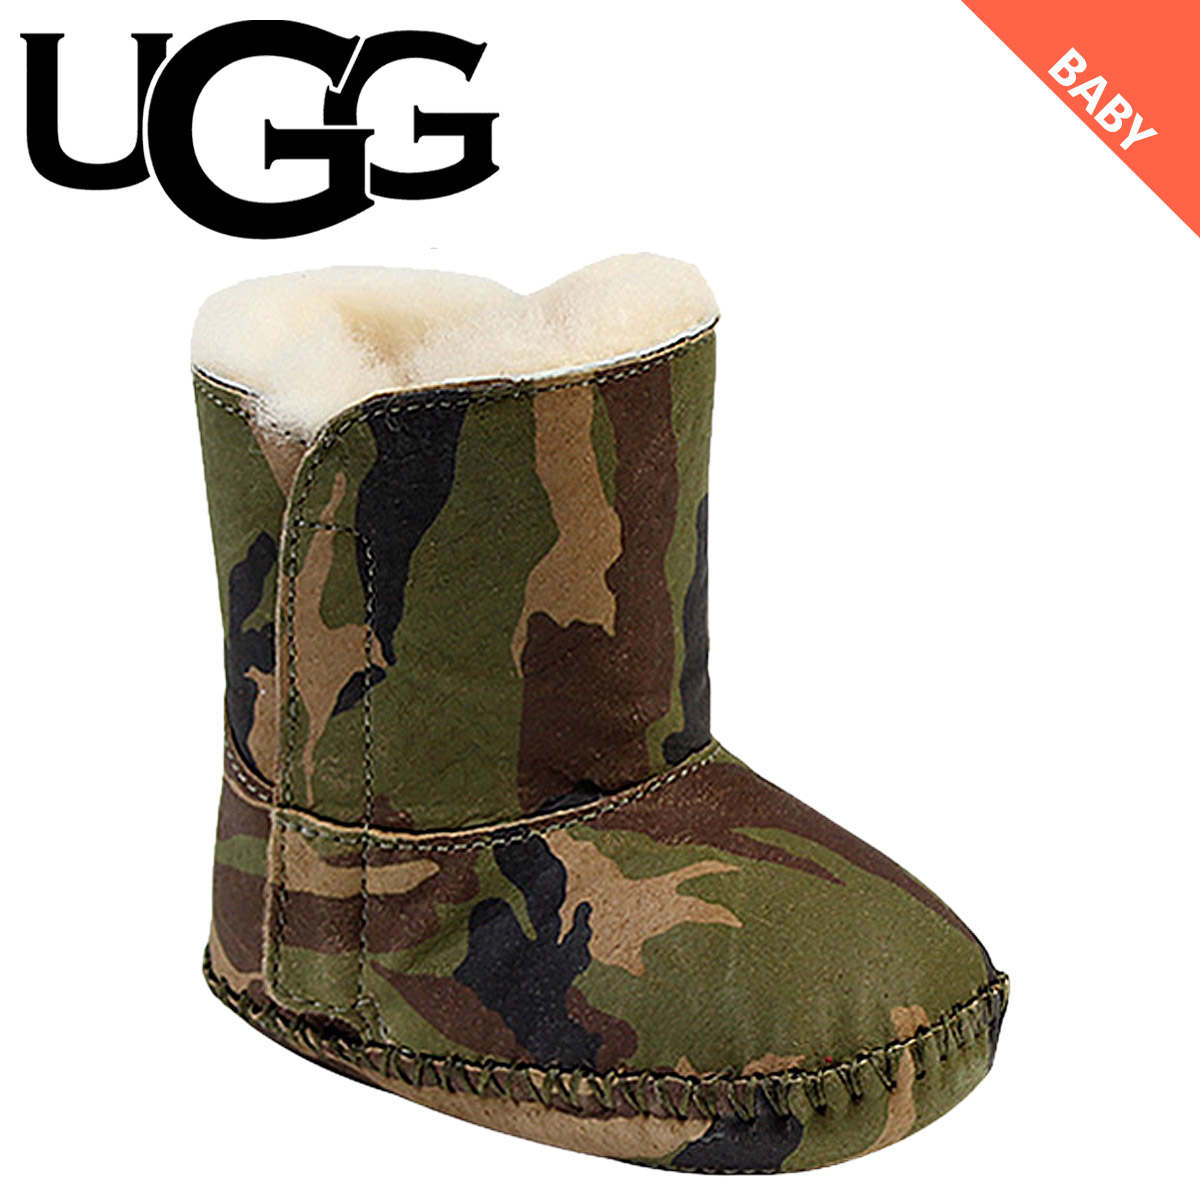 baby ugg boots size guide